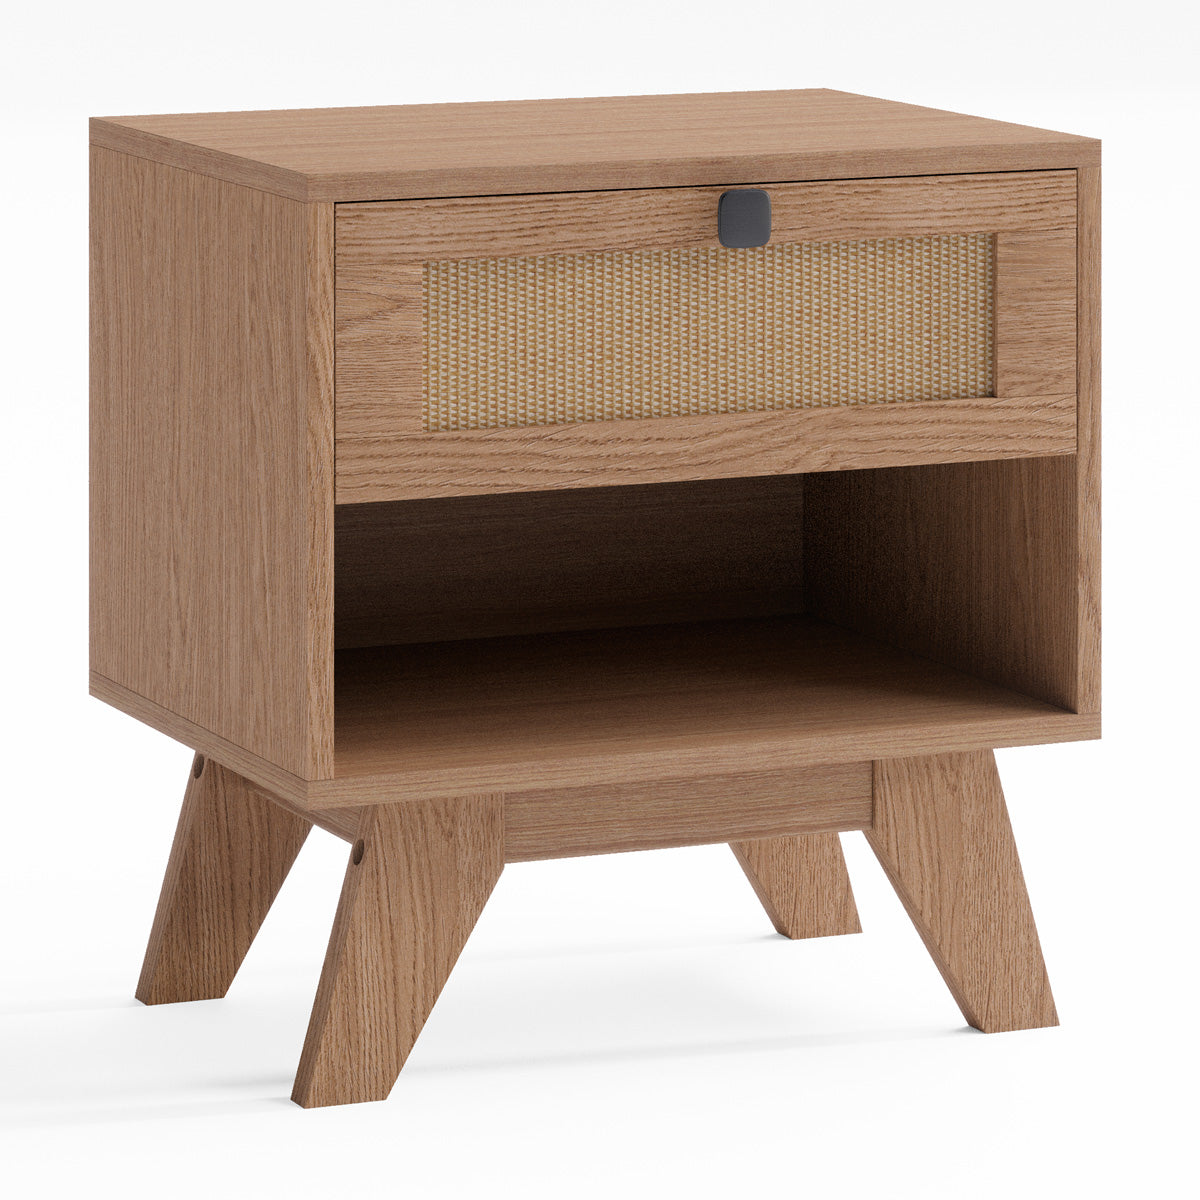 Rattan Cane Wooden Bedside Table (Talia)